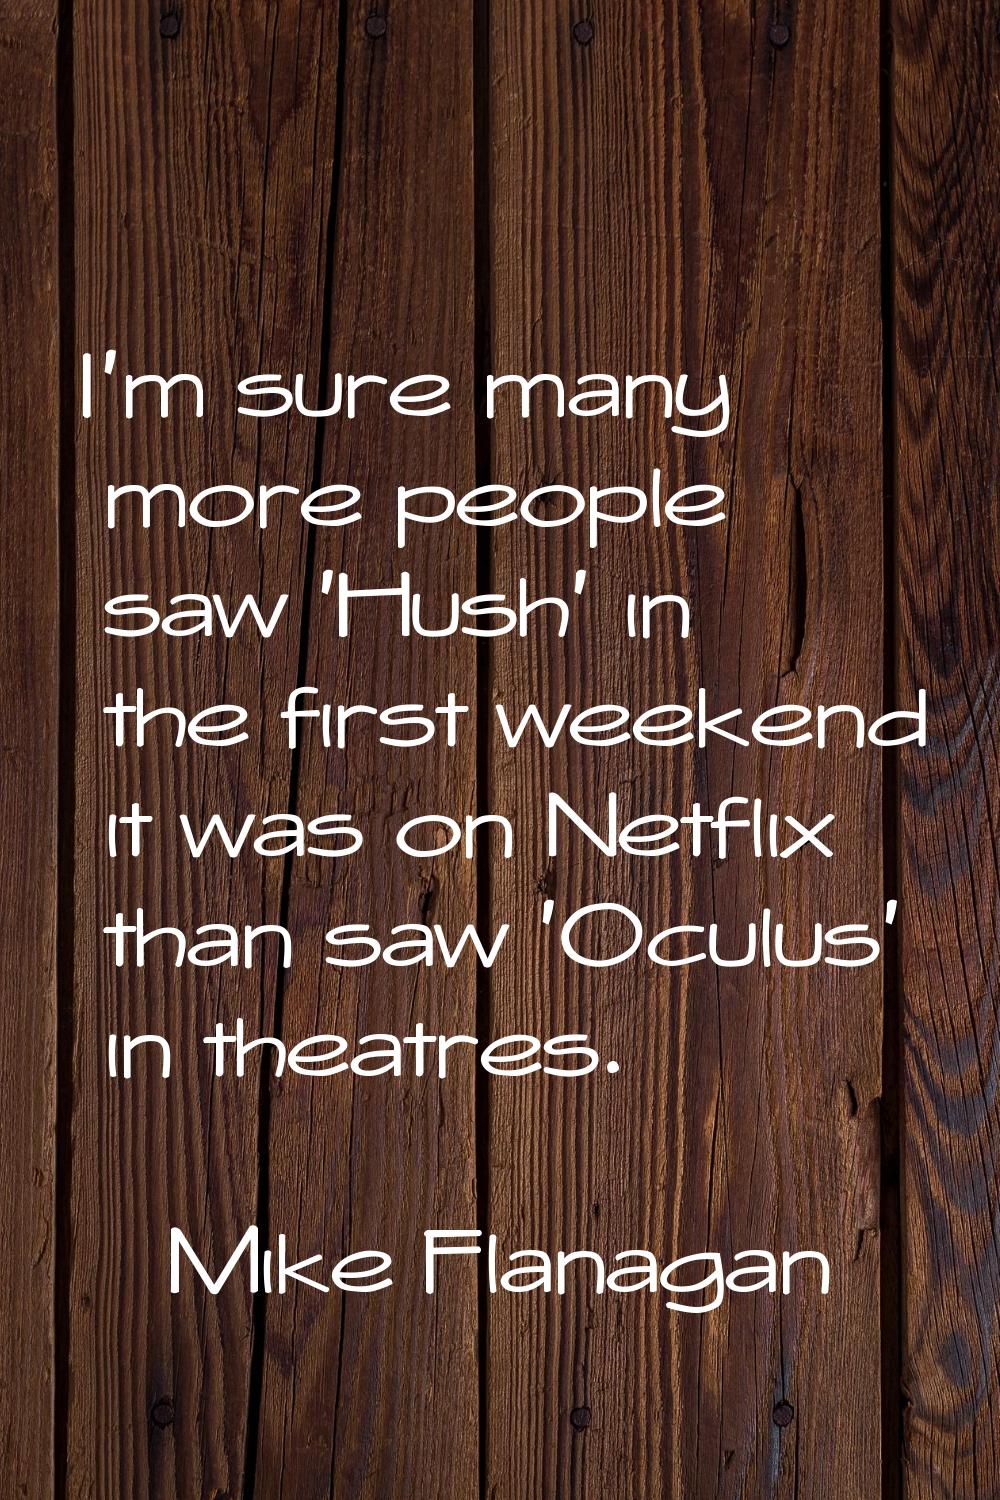 I'm sure many more people saw 'Hush' in the first weekend it was on Netflix than saw 'Oculus' in th